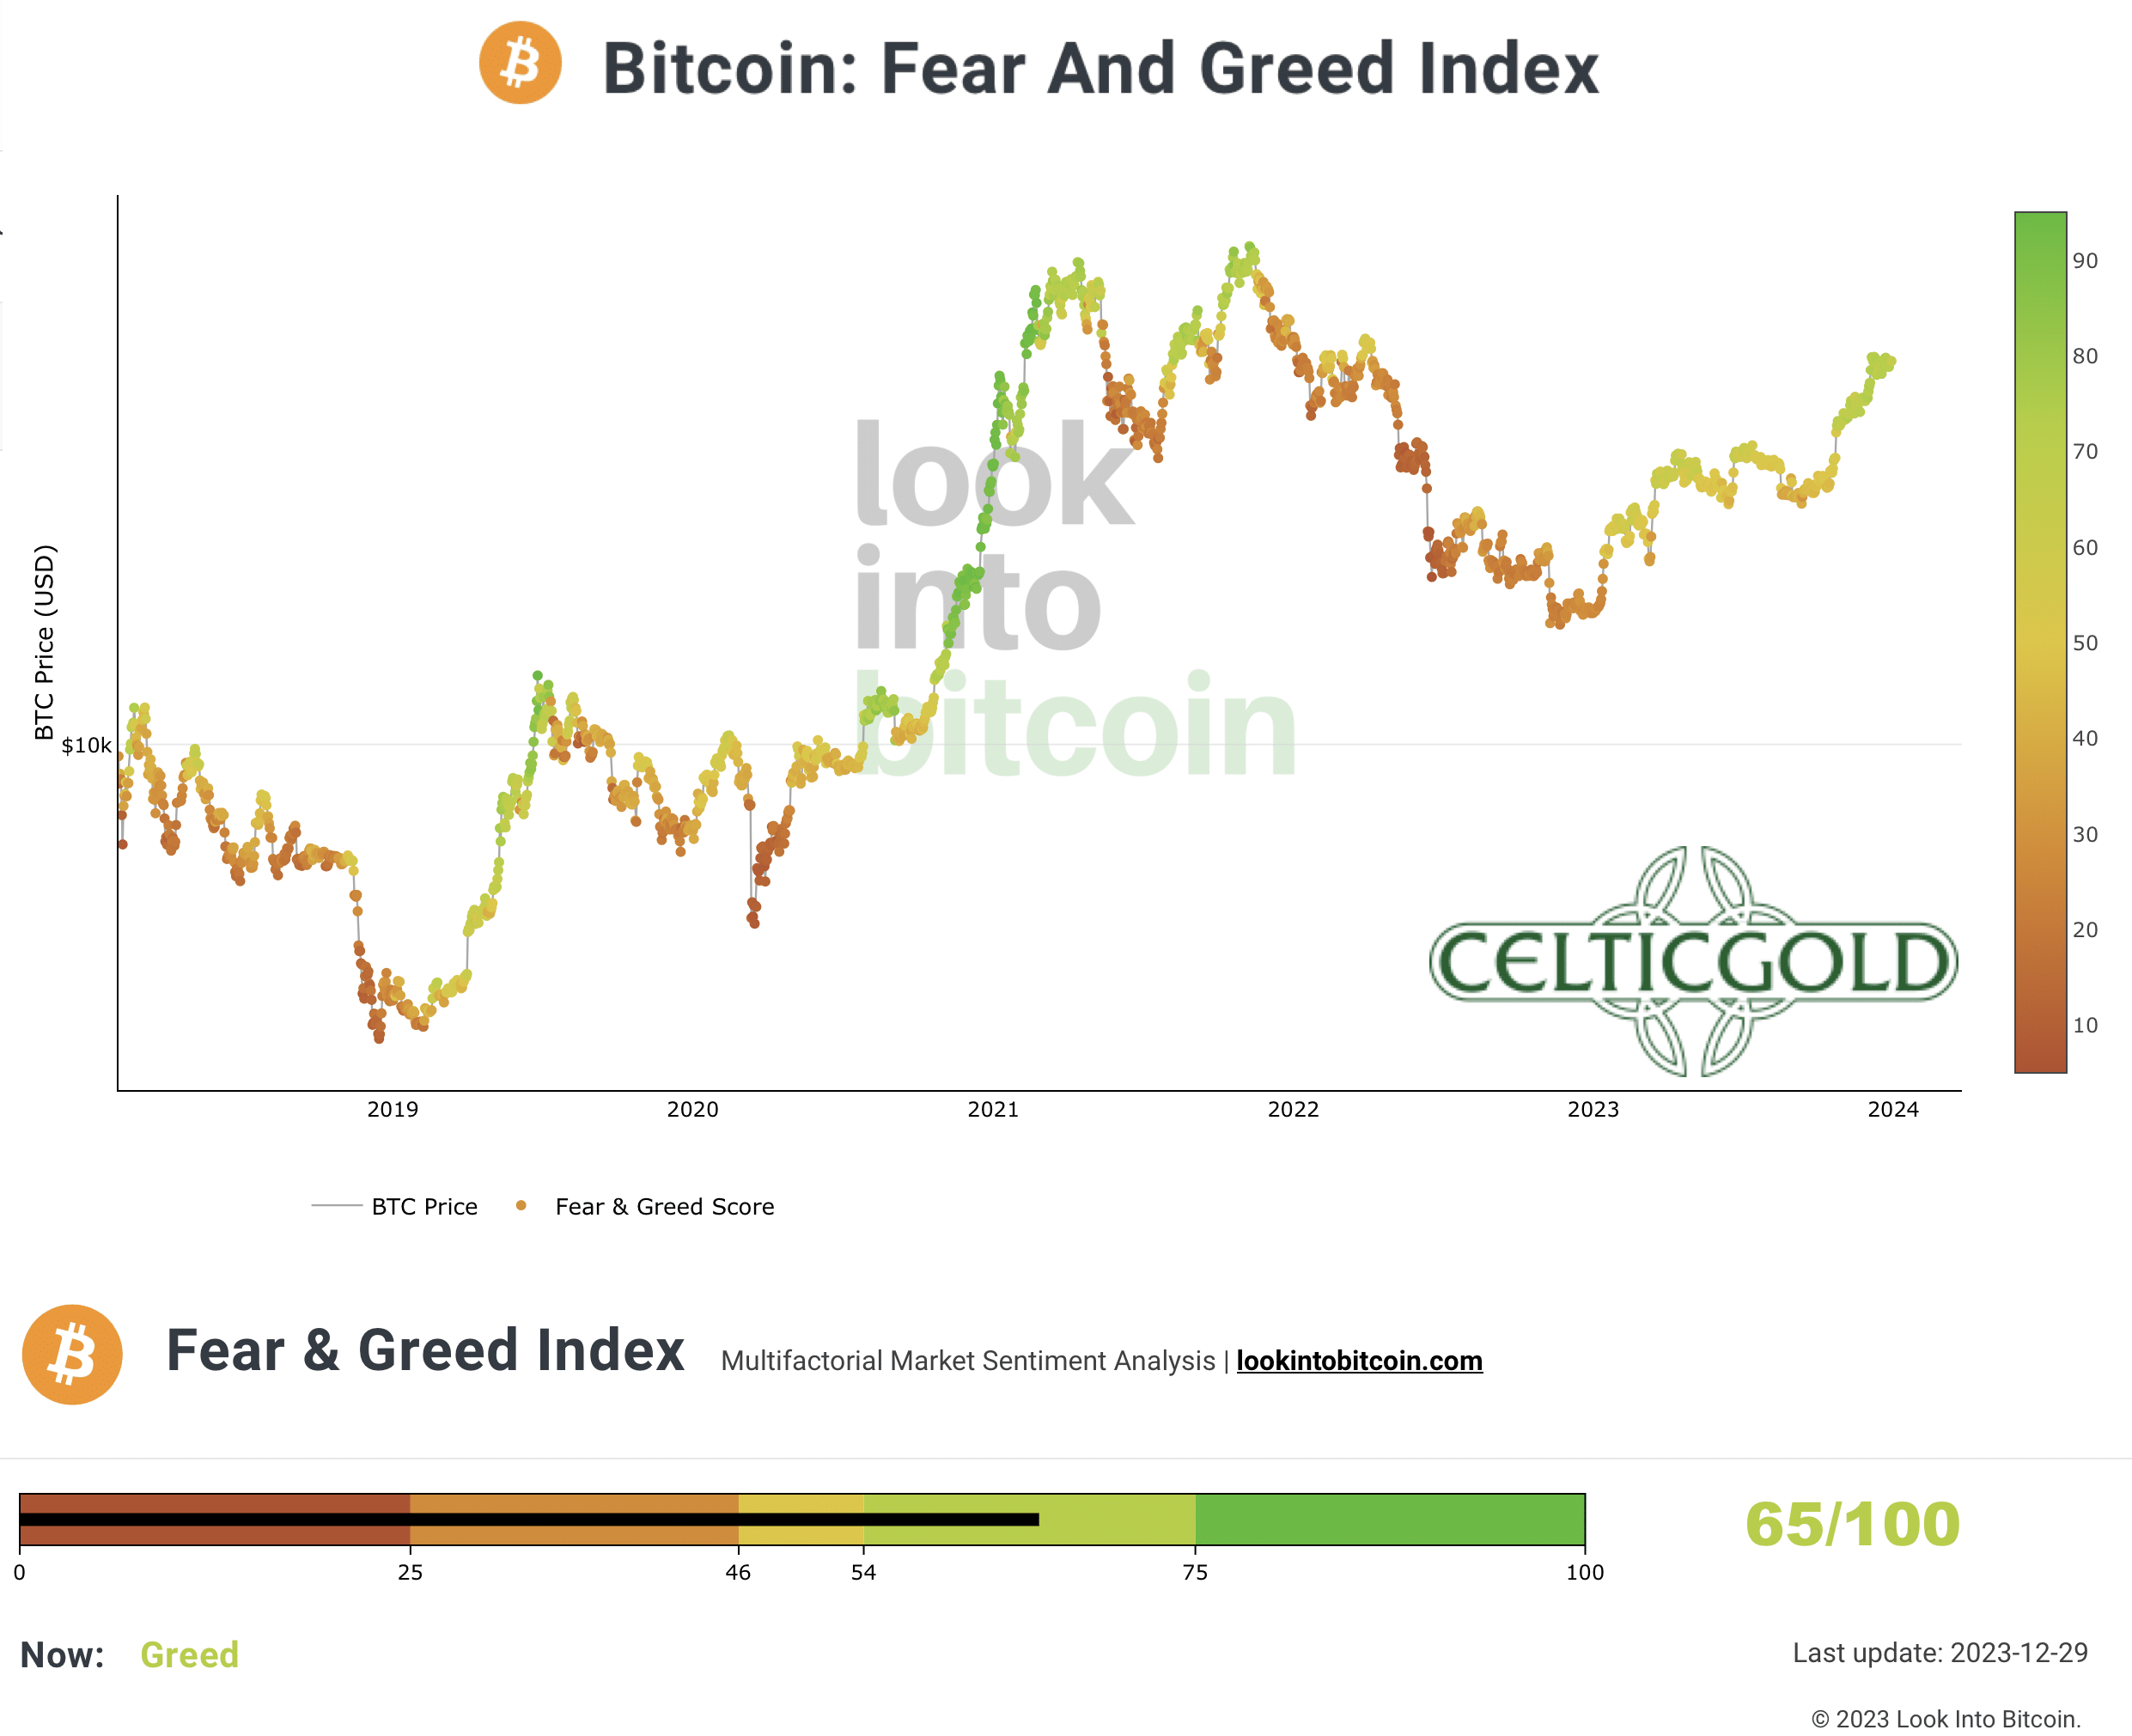 Crypto Fear & Greed Index long term, as of December 29th, 2023. Source: Lookintobitcoin